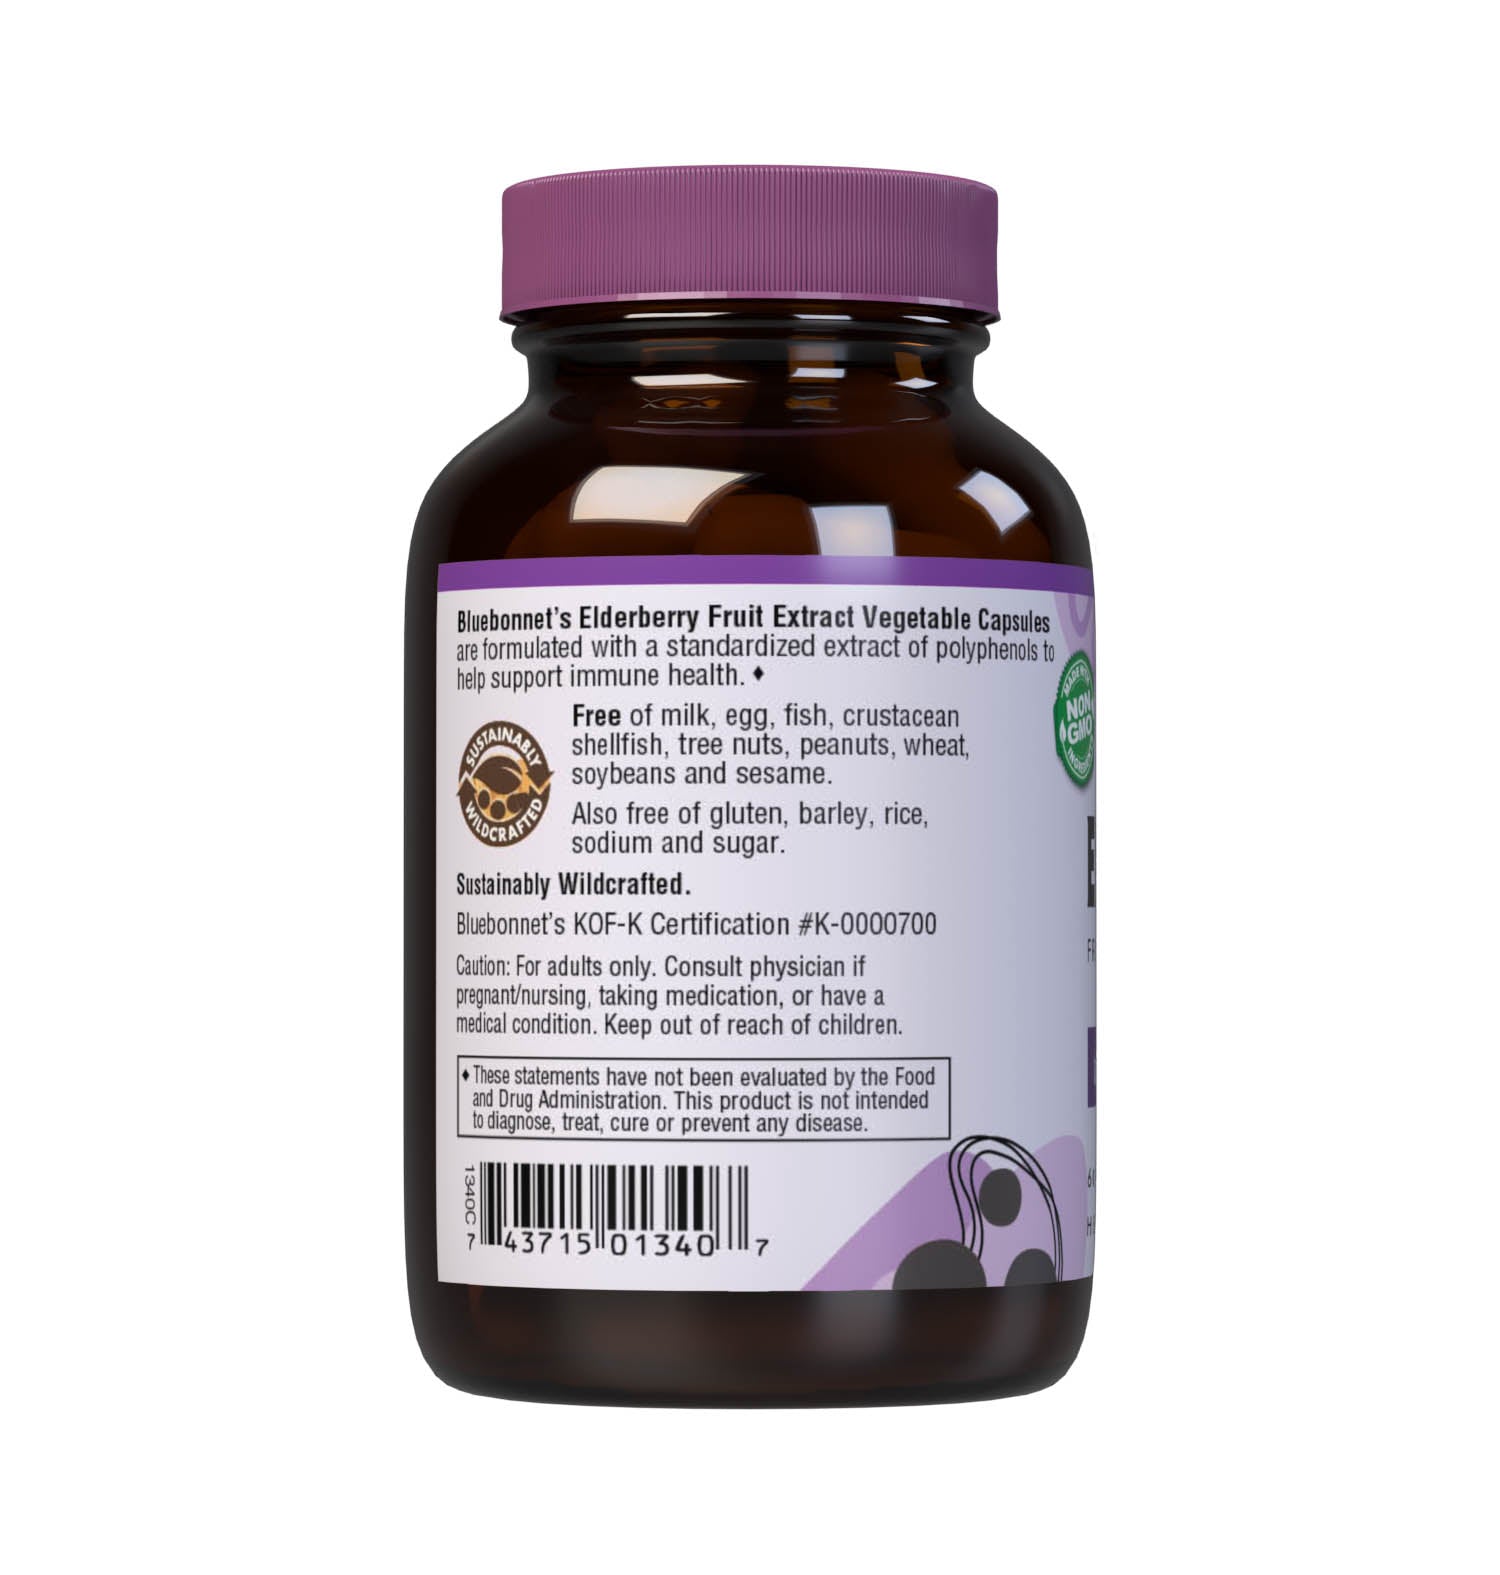 Bluebonnet’s Elderberry Fruit Extract 60 Vegetable Capsules contain a standardized extract of polyphenols, the most researched active constituents found in elderberry, which may help support immune health. A clean and gentle water-based extraction method is employed to capture and preserve elderberry’s most valuable components. Description panel. #size_60 count